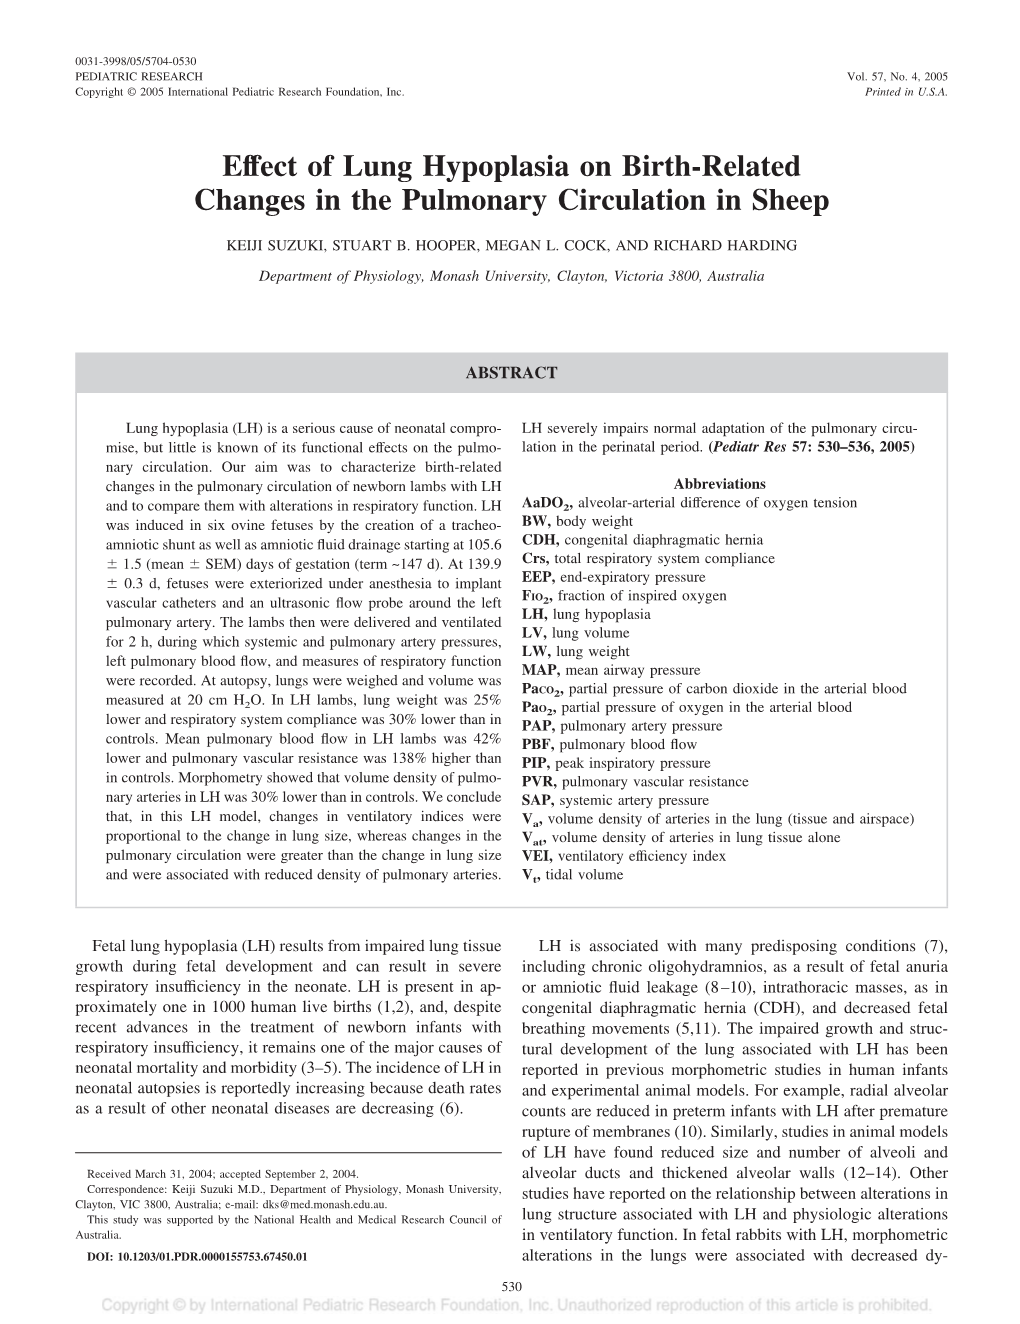 Effect of Lung Hypoplasia on Birth-Related Changes in the Pulmonary Circulation in Sheep